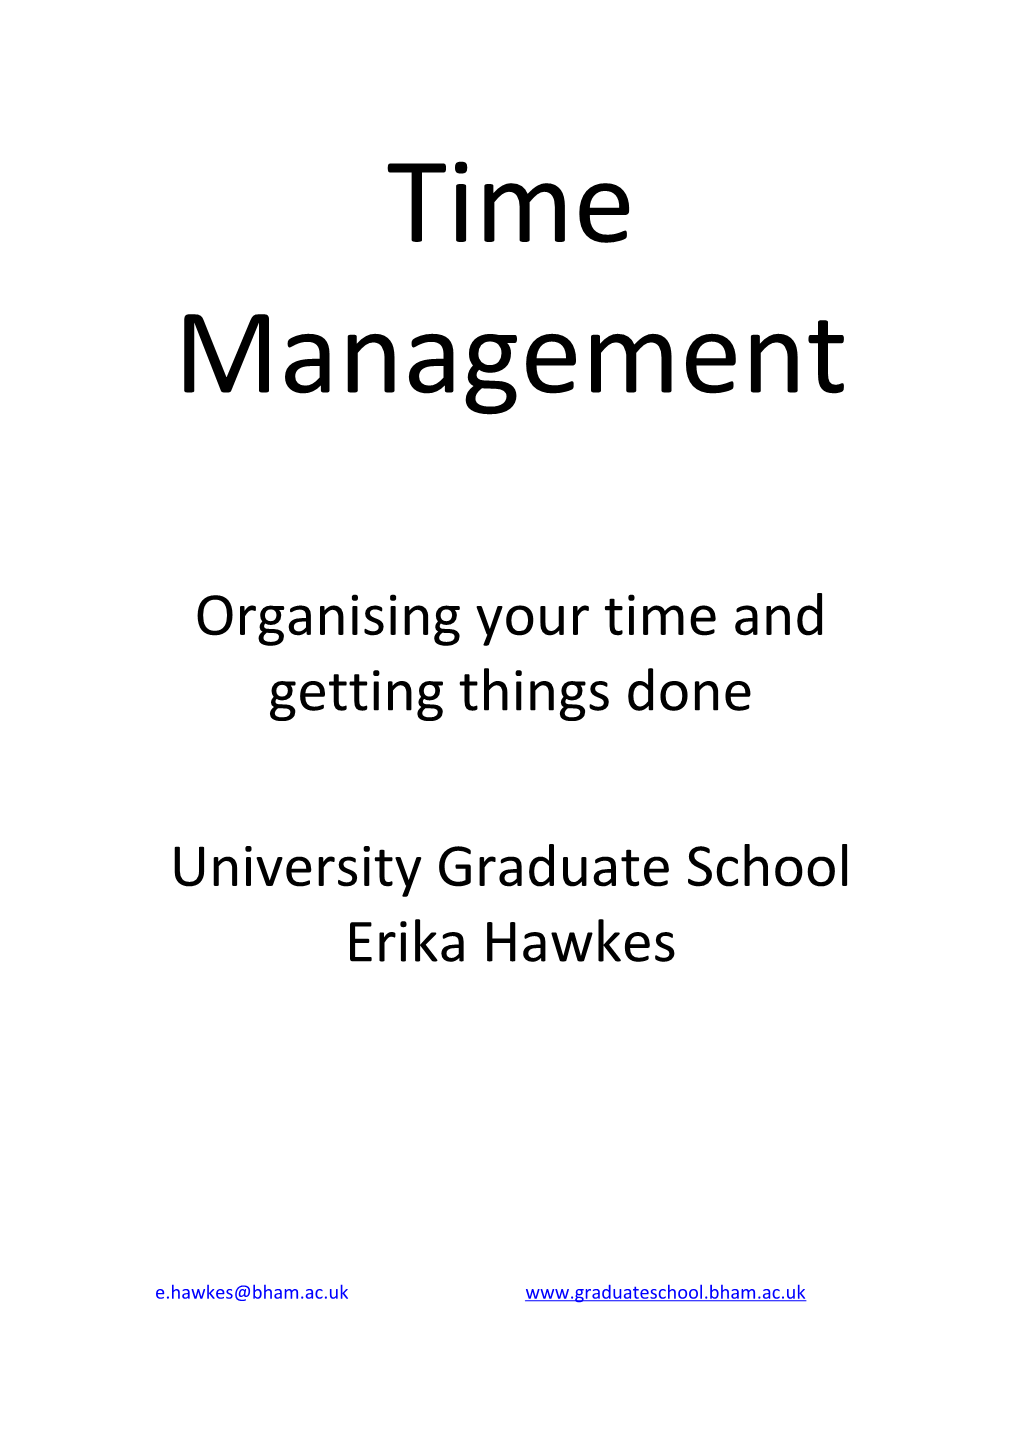 Organising Your Time and Getting Things Done